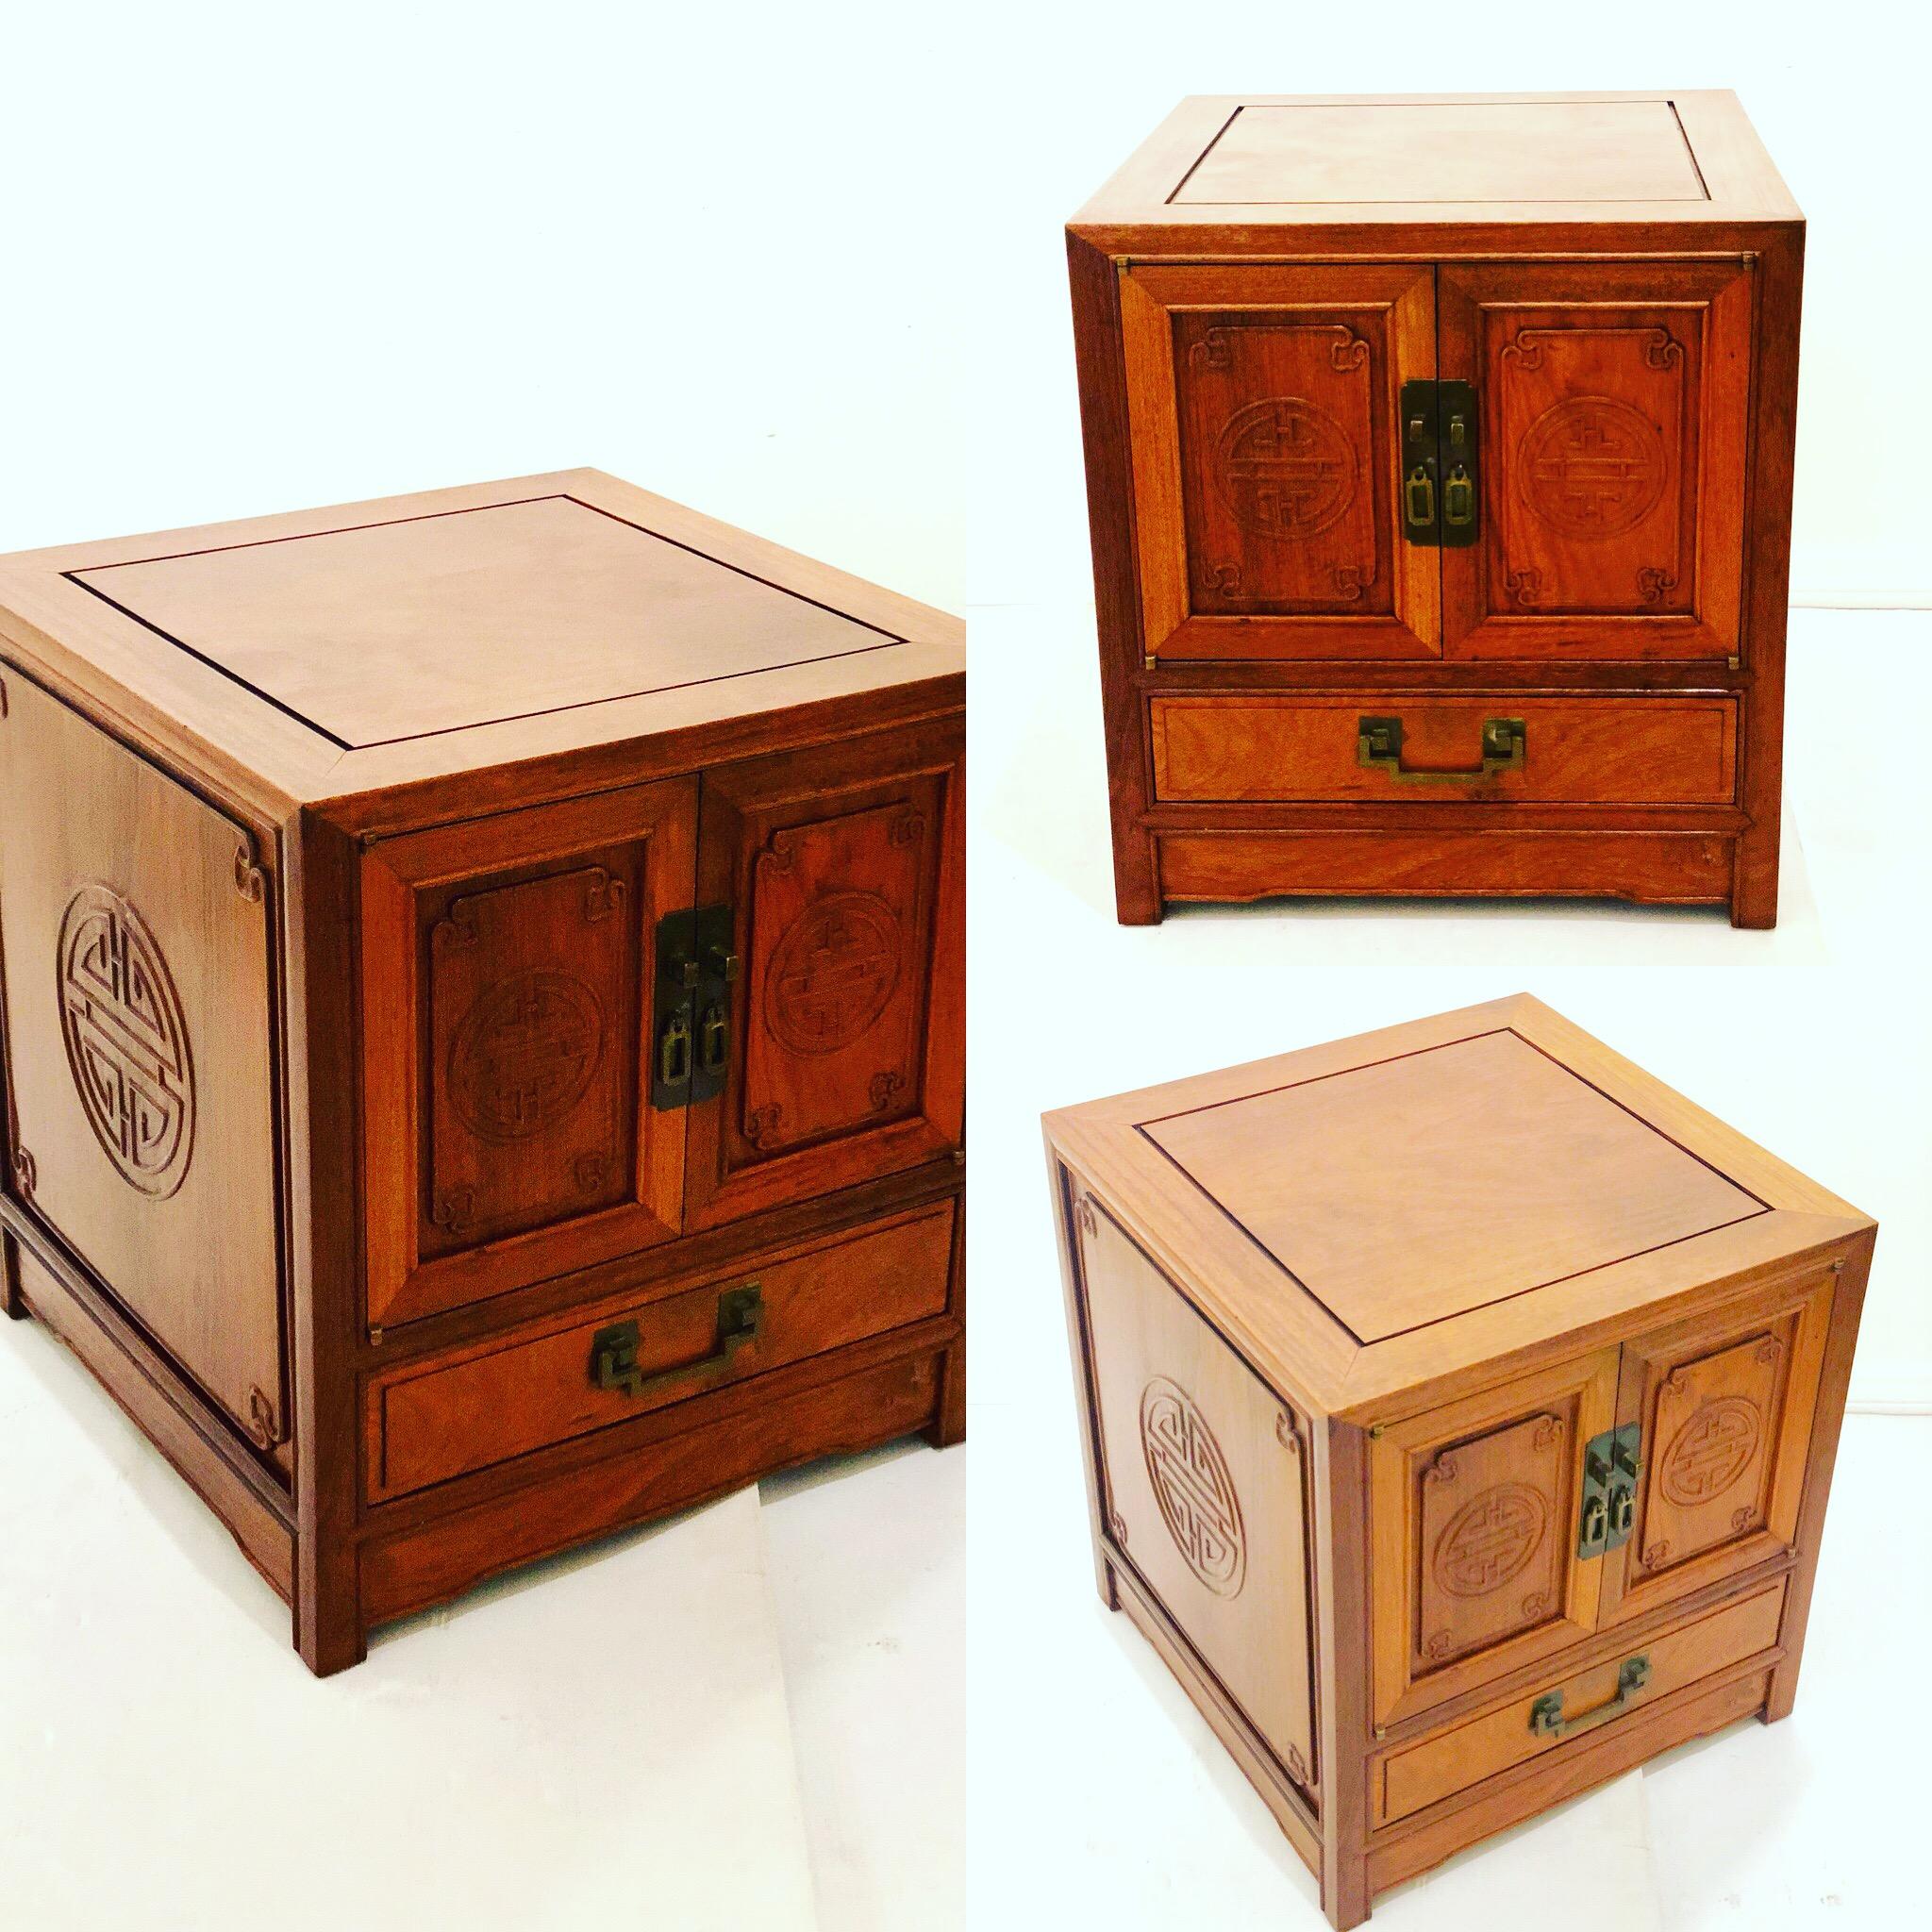 Beautiful and versatile small double door cabinet in solid rosewood with solid brass handles and side carvings nice quality, original condition we have cleaned and oiled its nice and clean with its original metal label in the back.